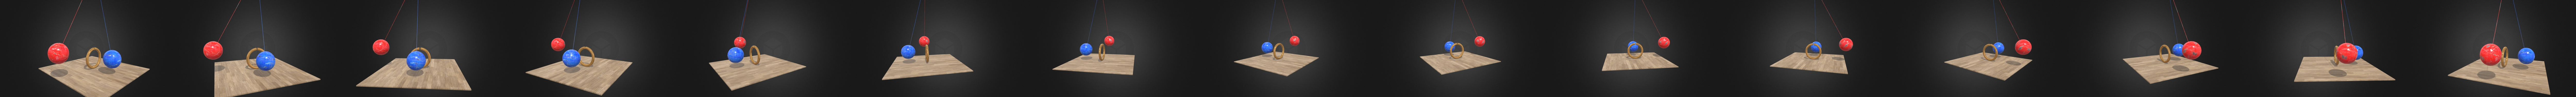 How to Animate a 3D Ball in Blender 